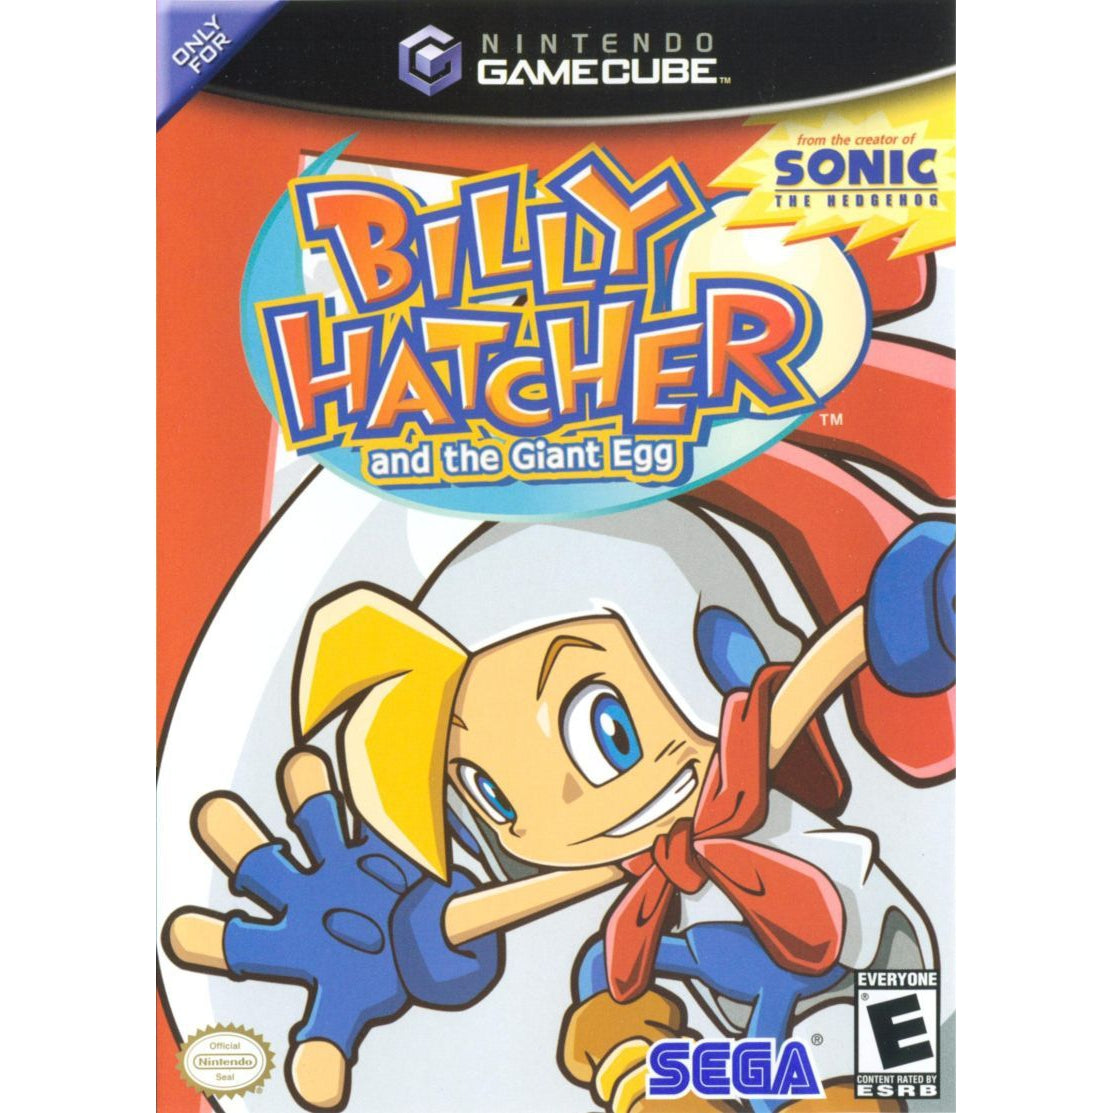 Billy Hatcher and the Giant Egg - GameCube Game Complete - YourGamingShop.com - Buy, Sell, Trade Video Games Online. 120 Day Warranty. Satisfaction Guaranteed.